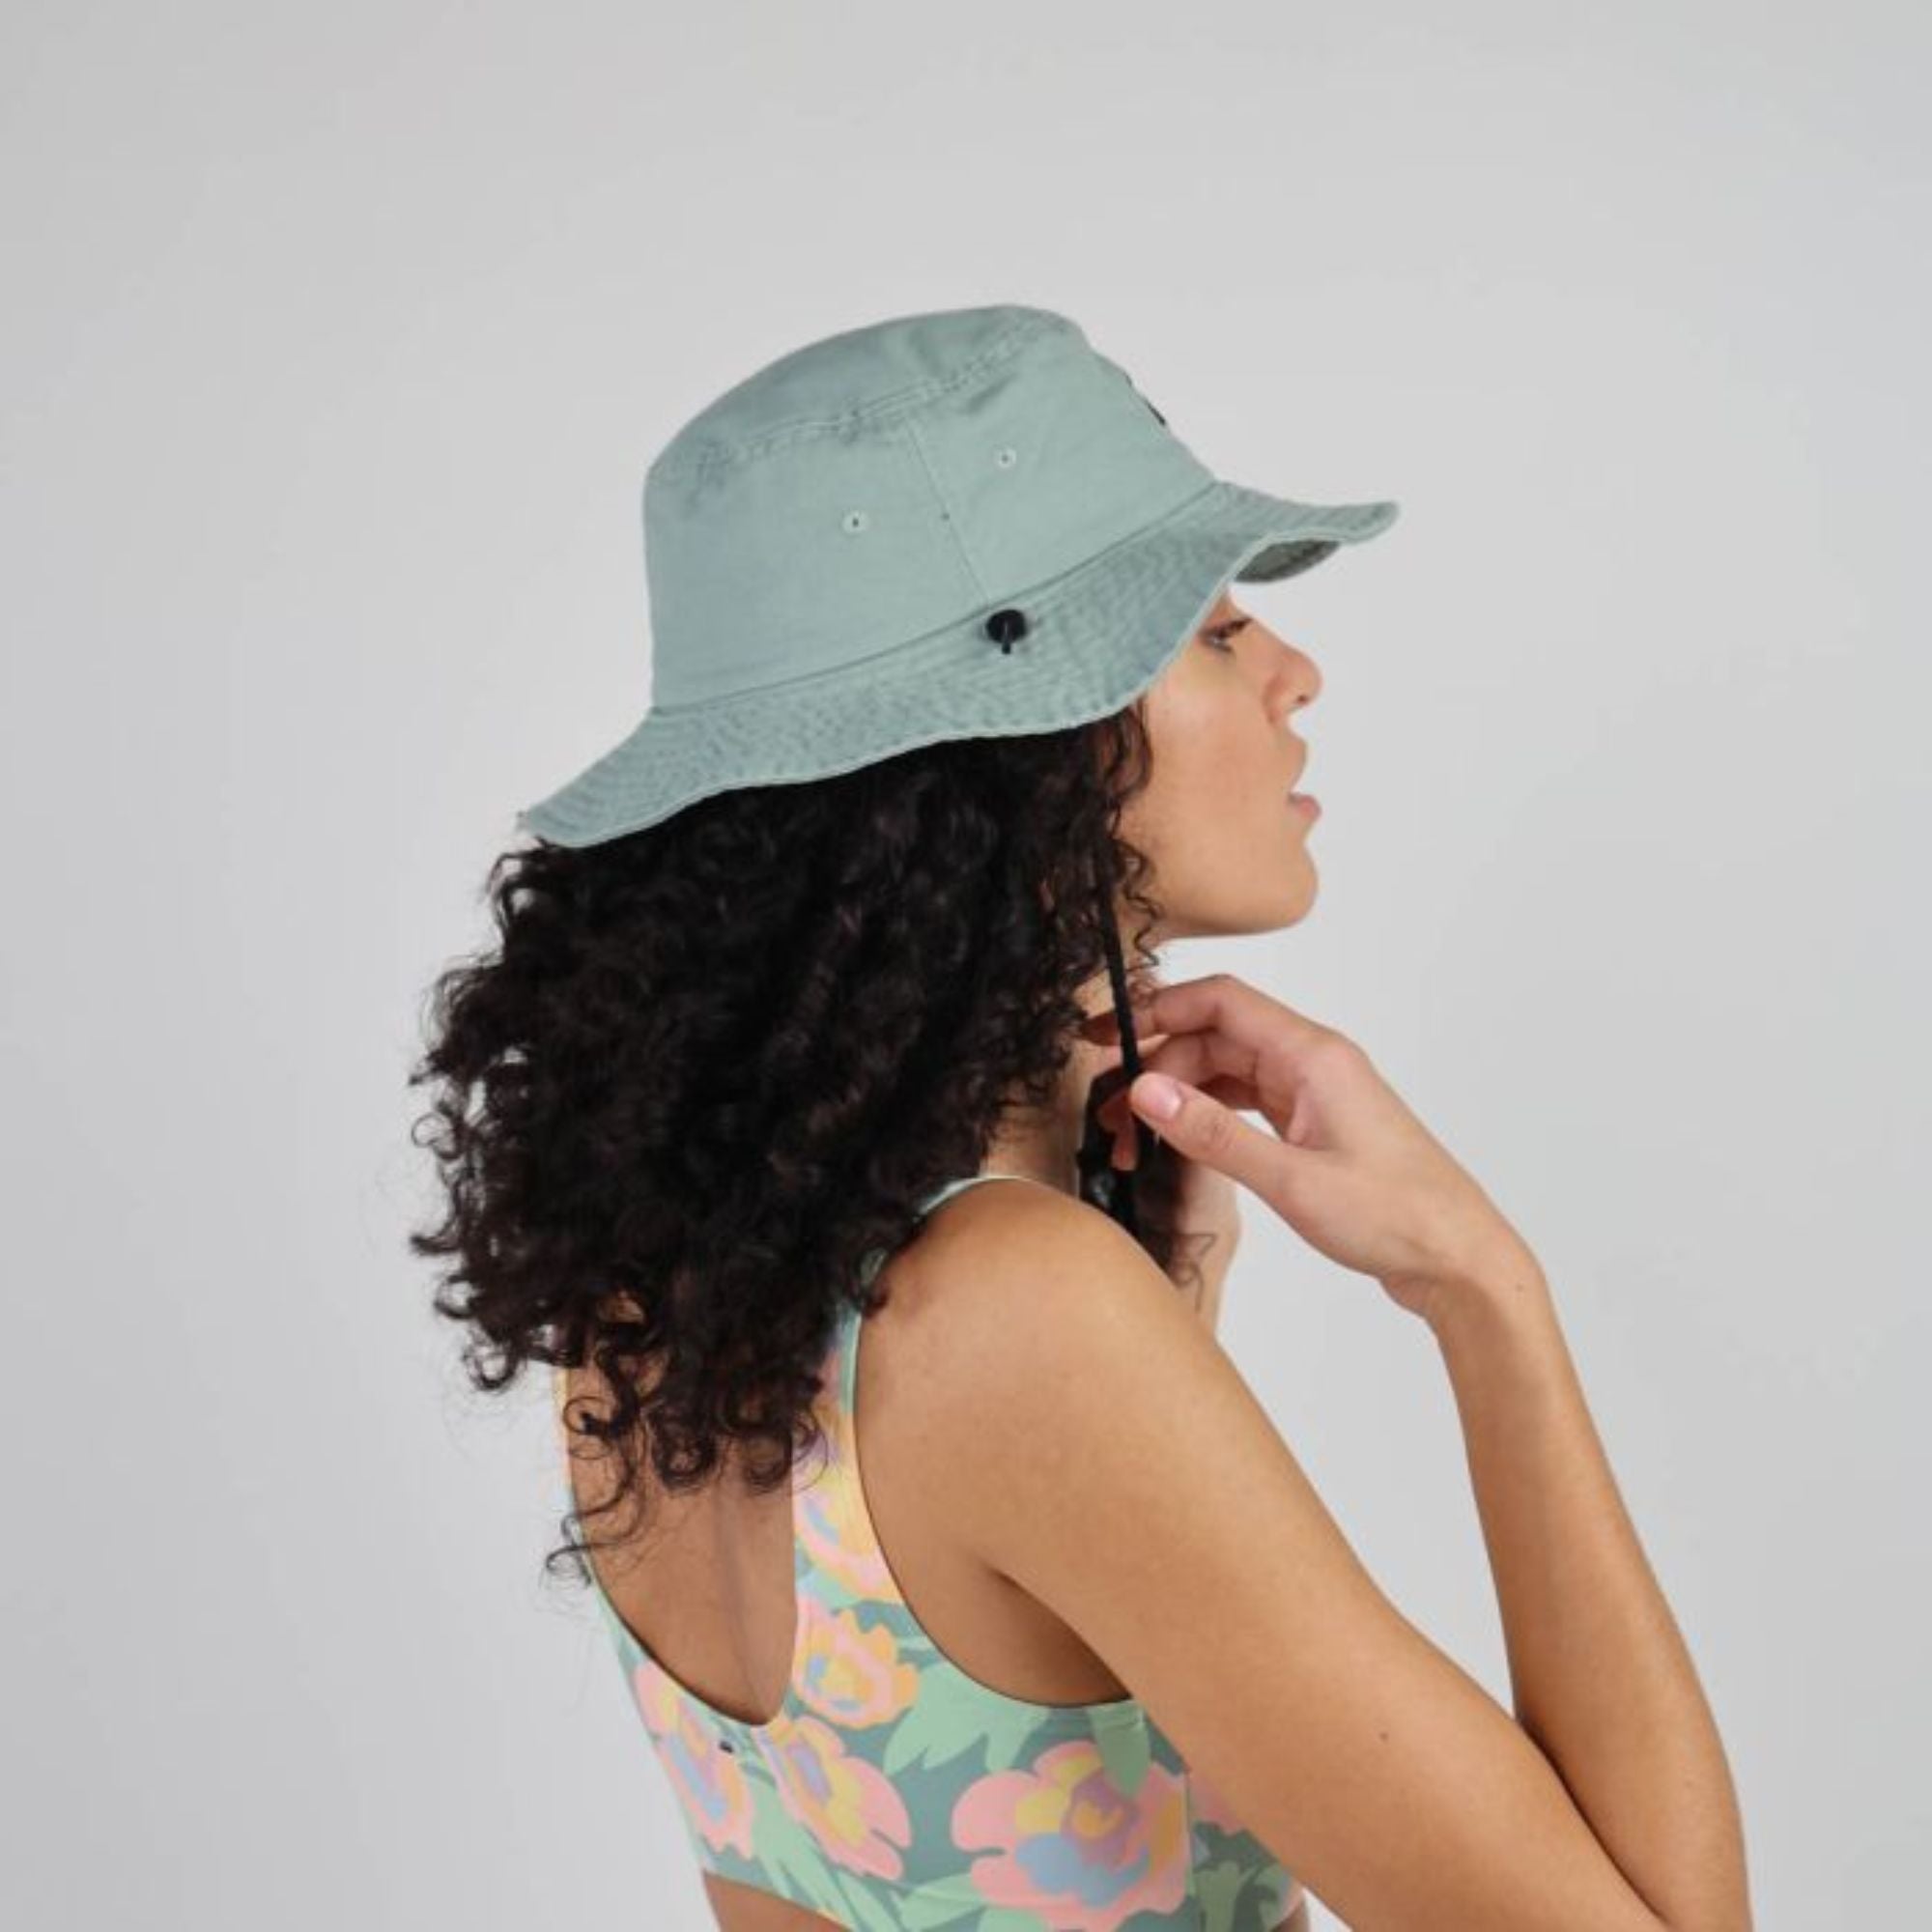 Oxbow Ebush Hat | OXBOW | Portwest - The Outdoor Shop